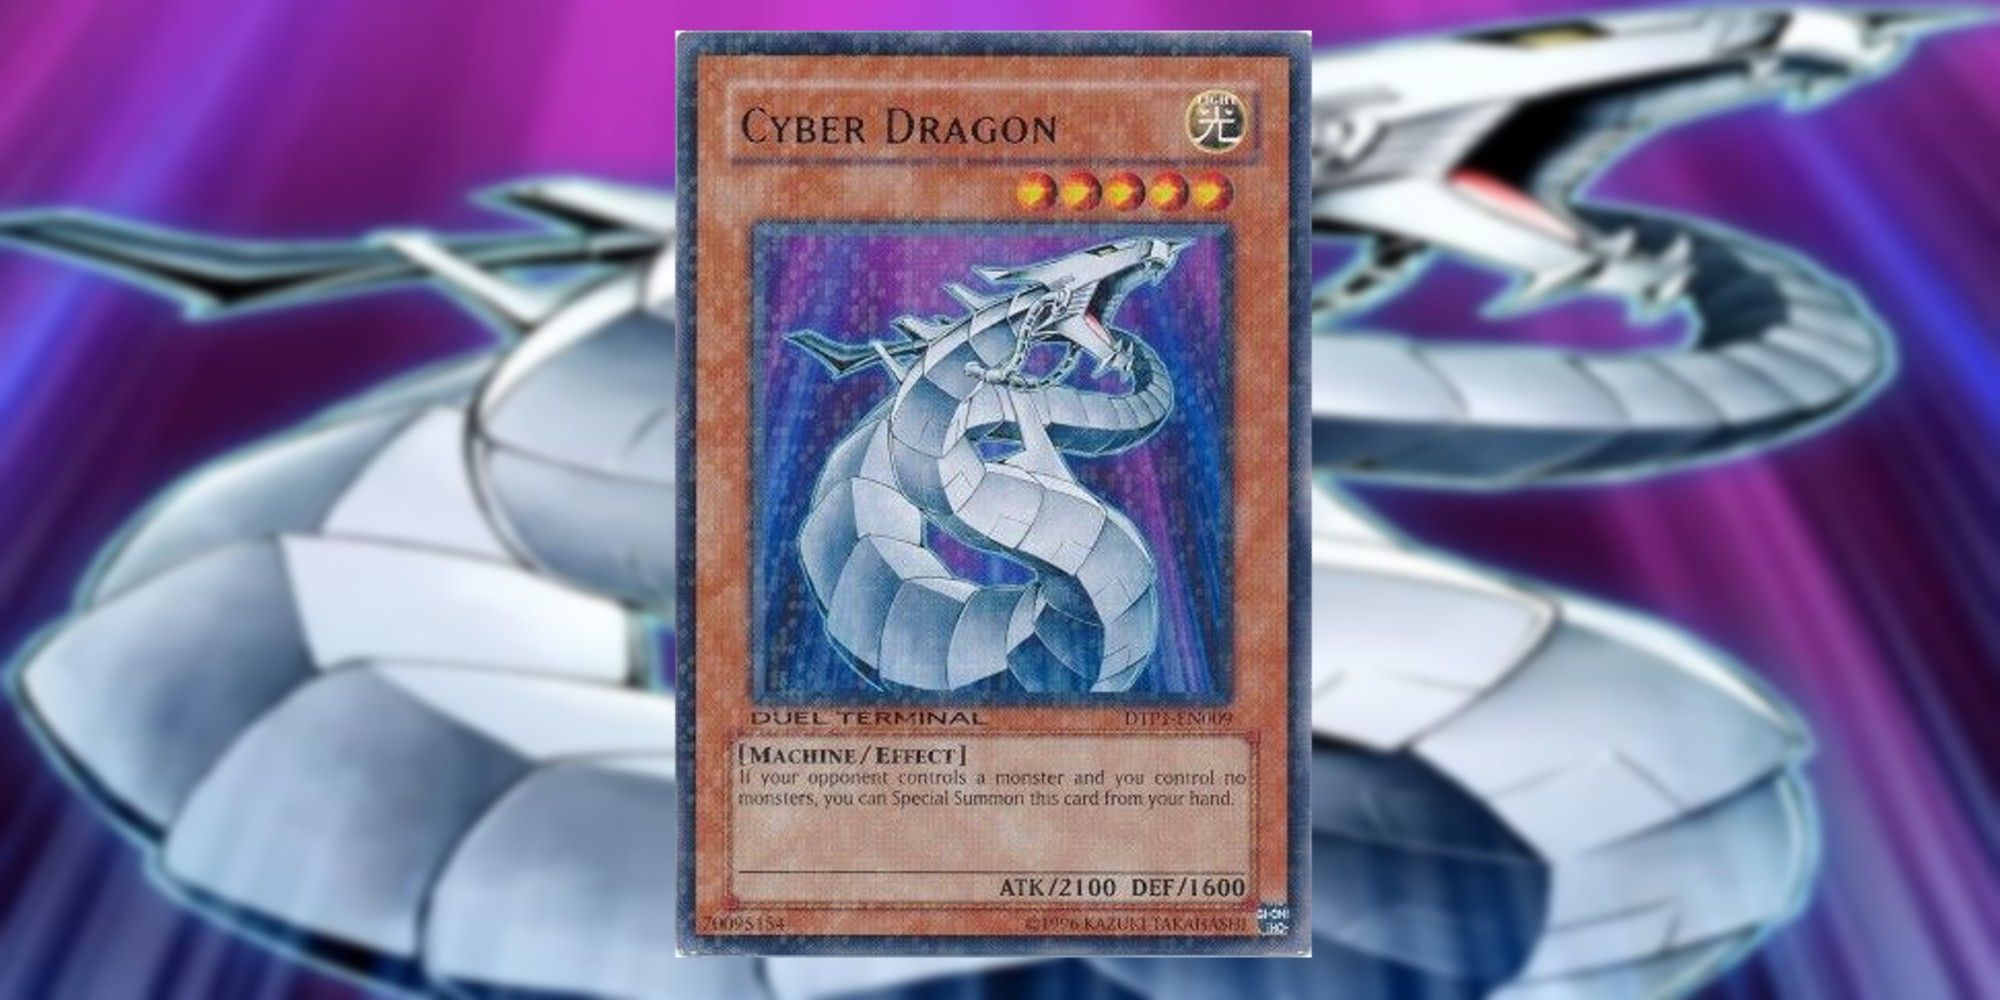 Cyber Dragon card and art background